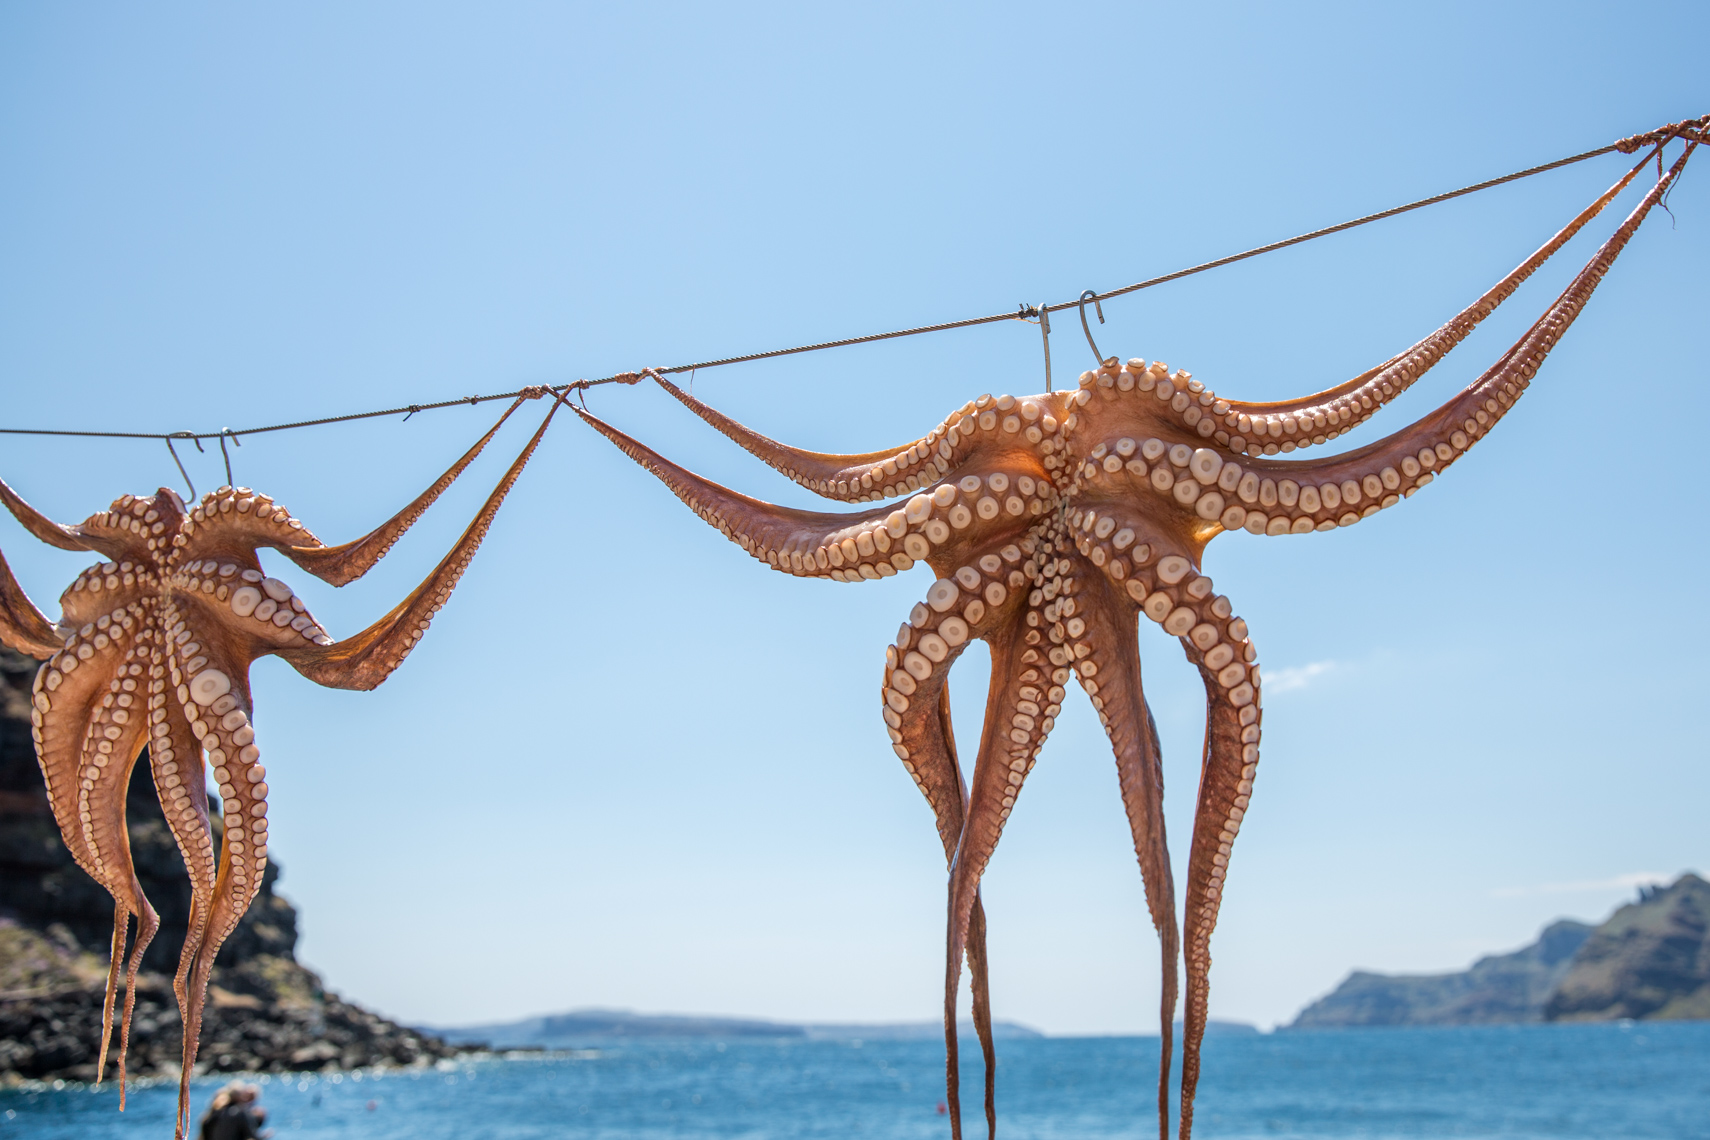 Two giant octopi ready for seafood grilling